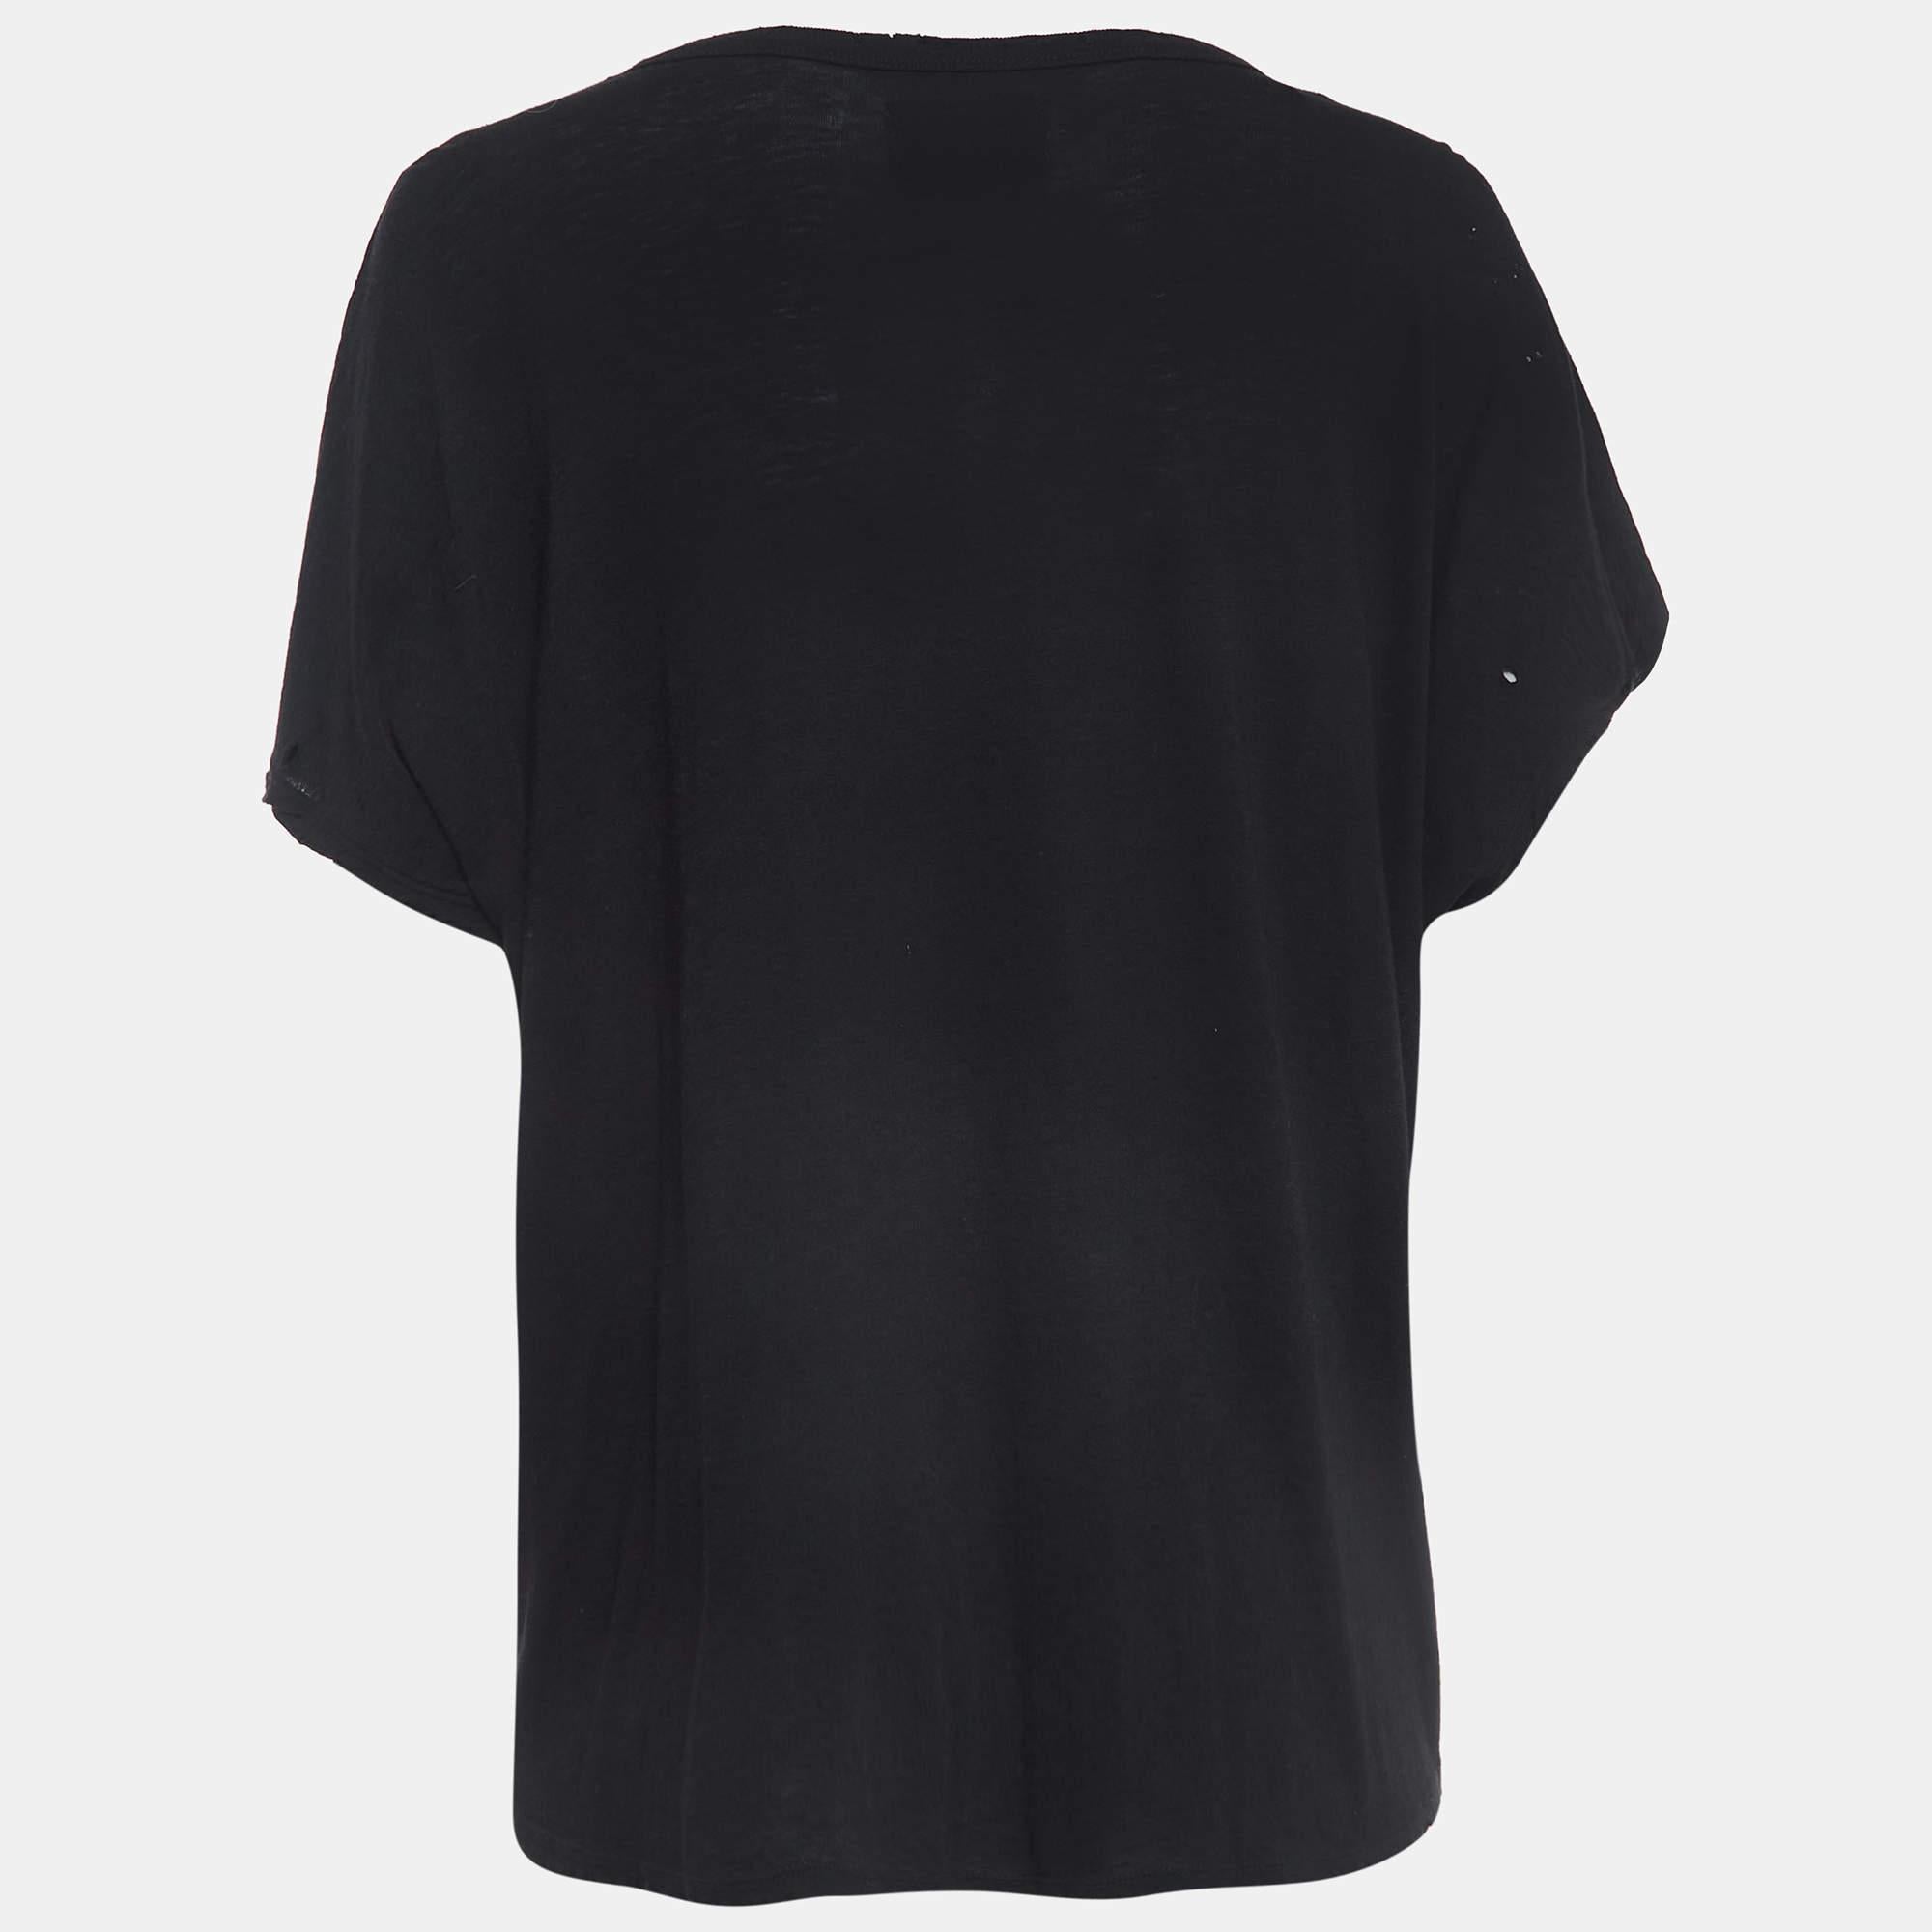 Perfect for casual outings or errands, this T-shirt is the best piece to feel comfortable and stylish in. It flaunts a classy black shade and a relaxed fit.

